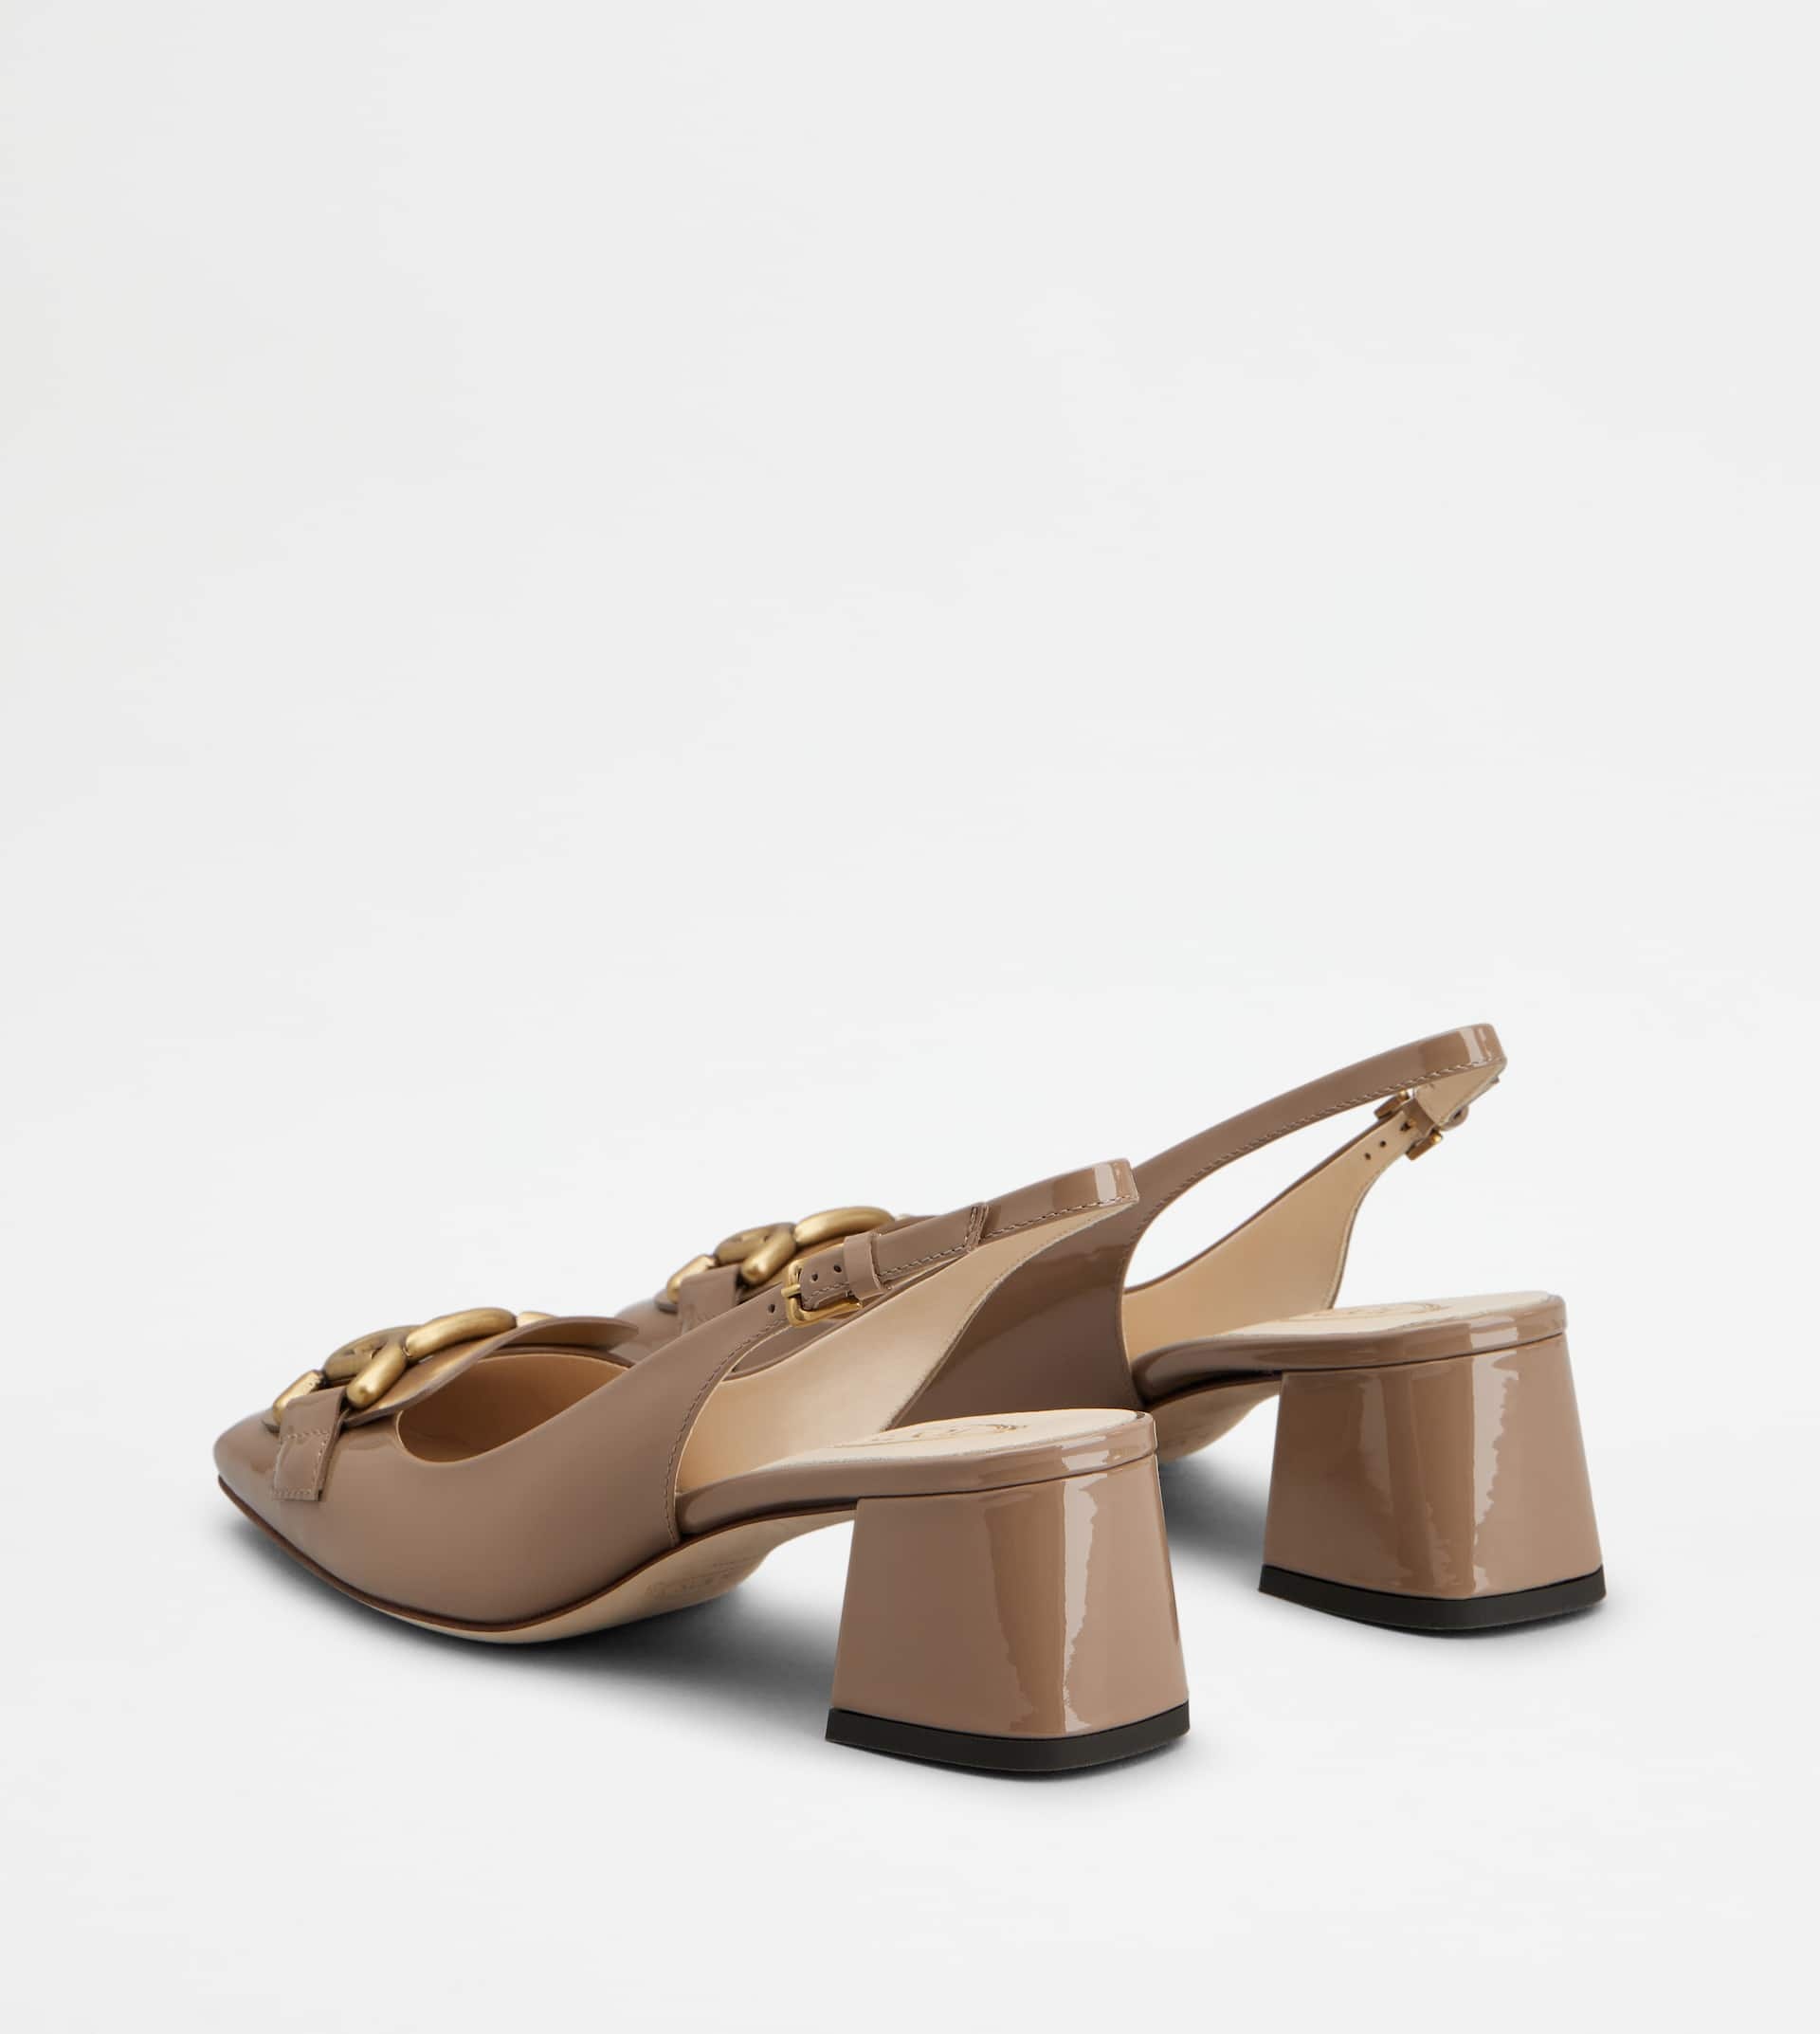 KATE SLINGBACK PUMPS IN PATENT LEATHER - BEIGE - 2